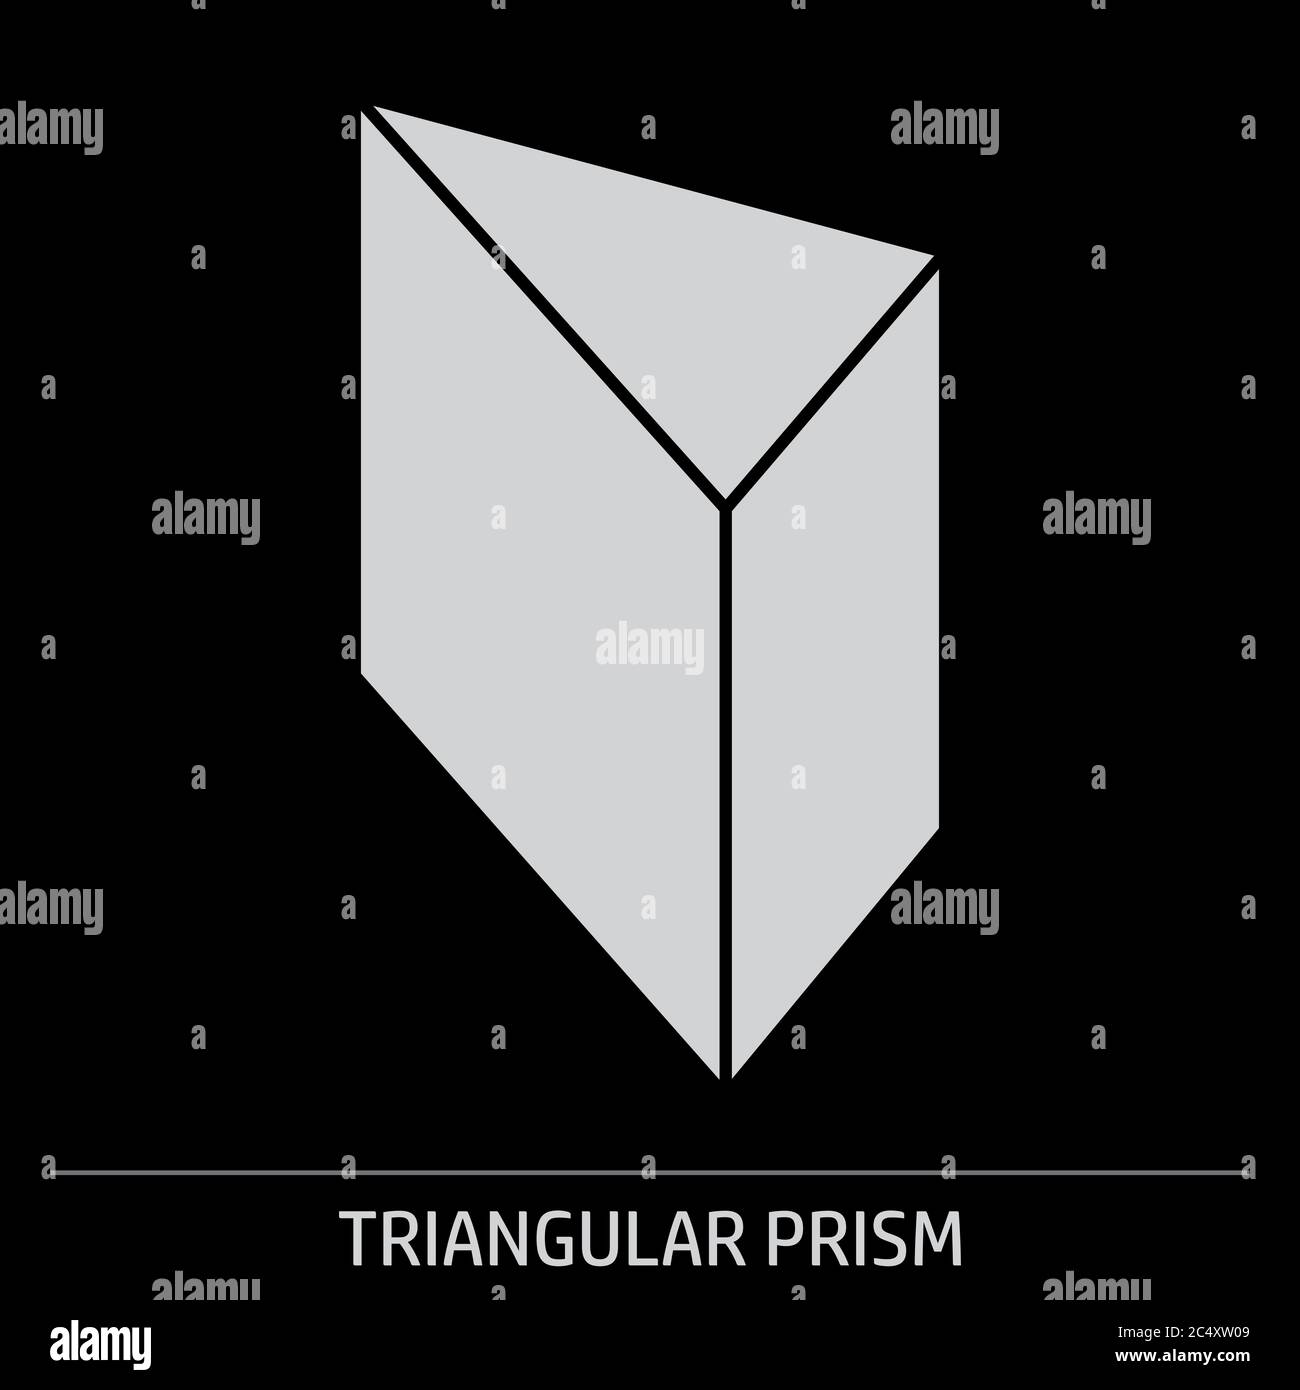 24,976 Prisma Triangular Images, Stock Photos, 3D objects